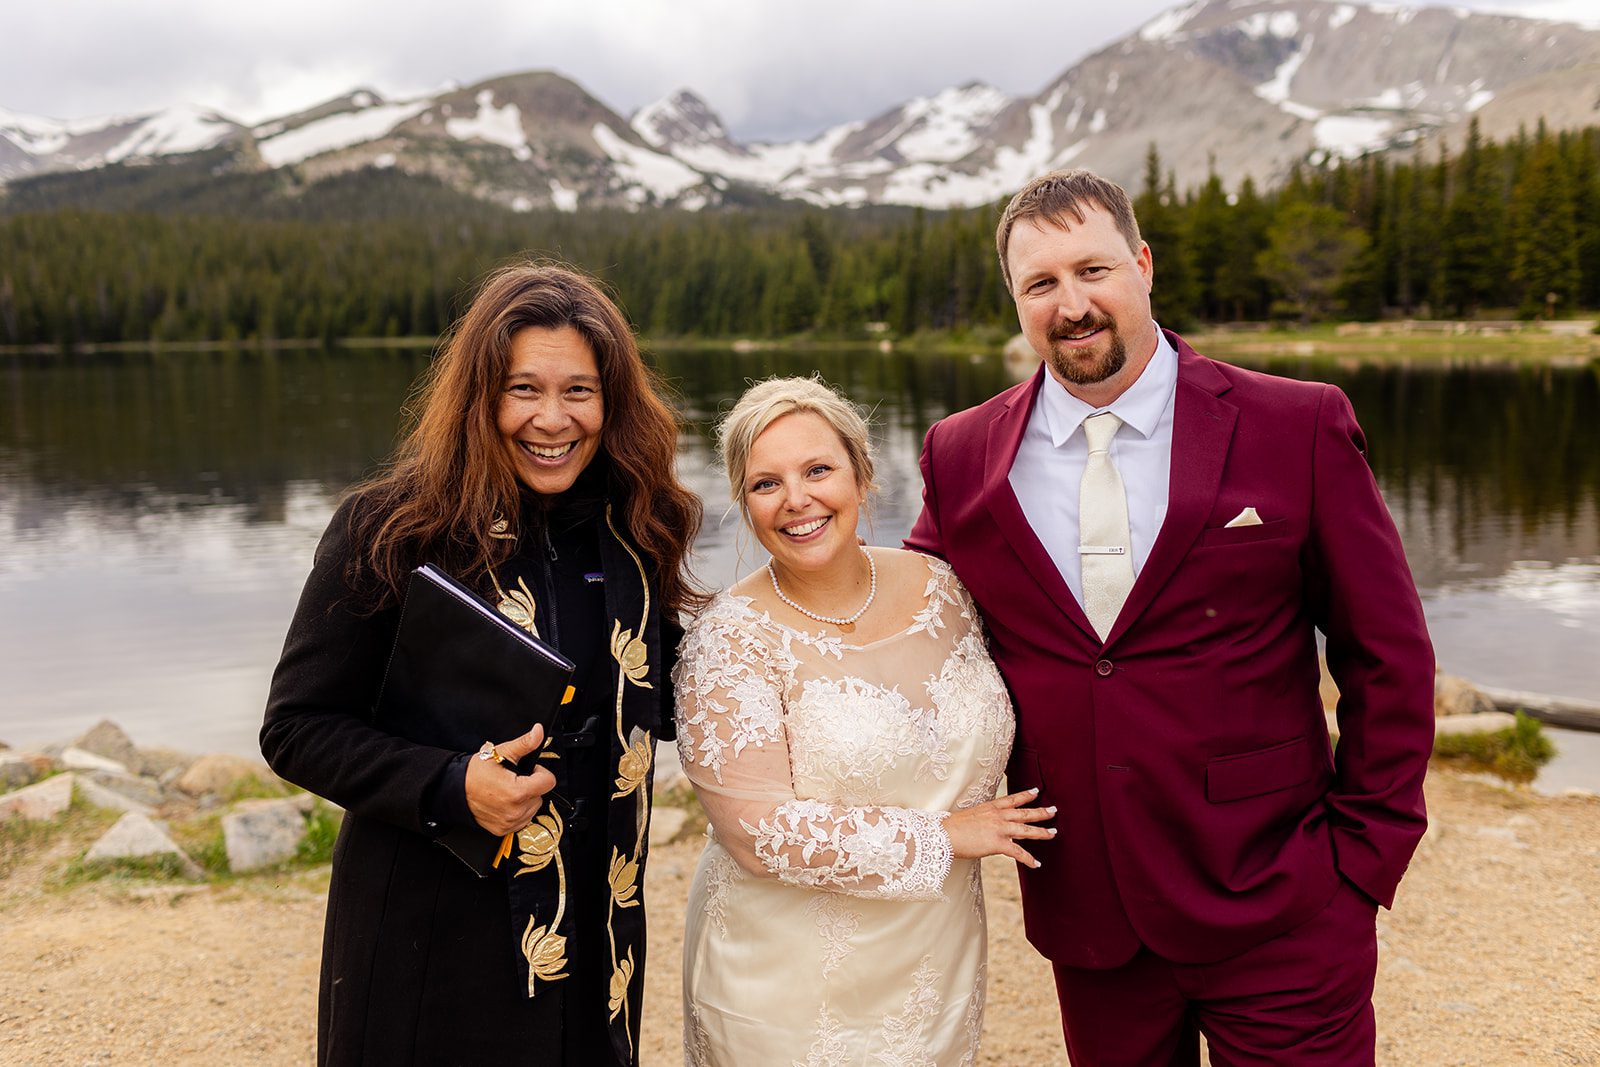 Bride, groom, and their officiant, at Brainard Lake after their wedding ceremony.